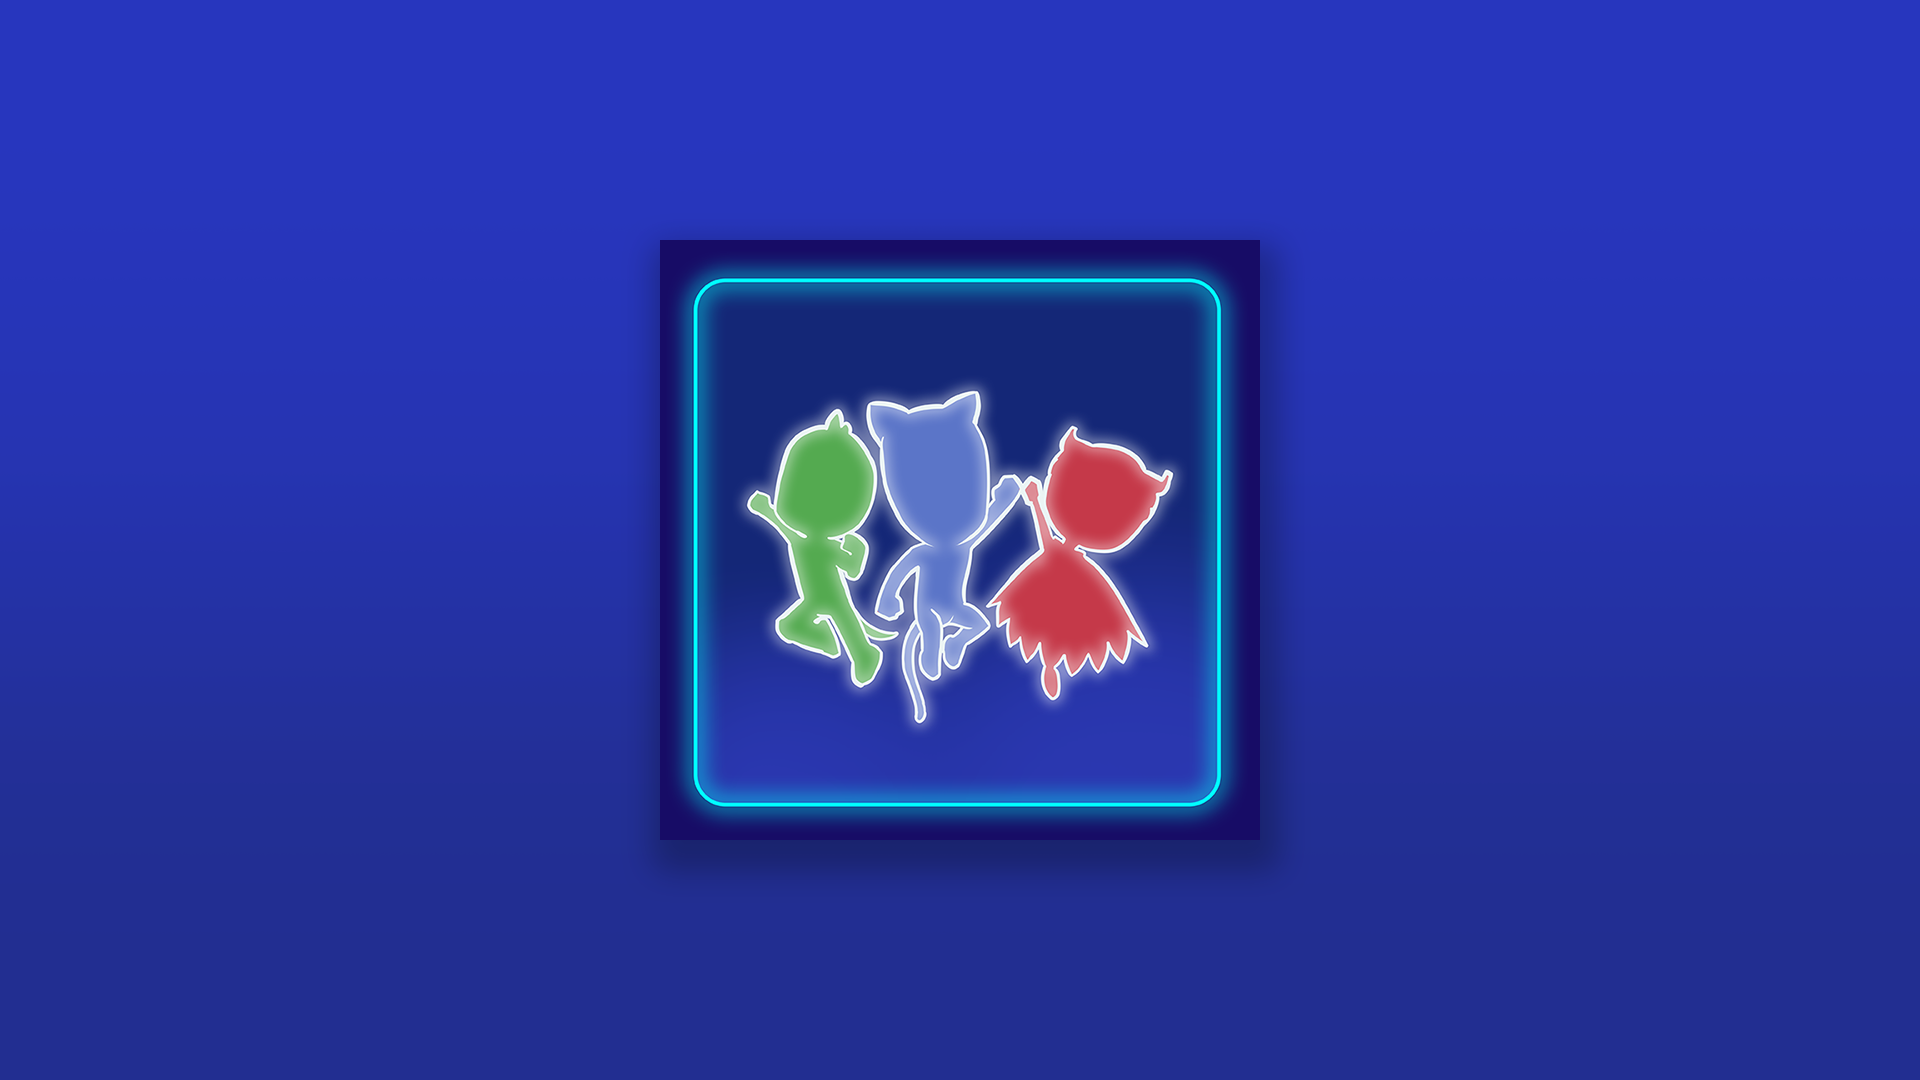 Icon for PJ Masks, all shout hooray...